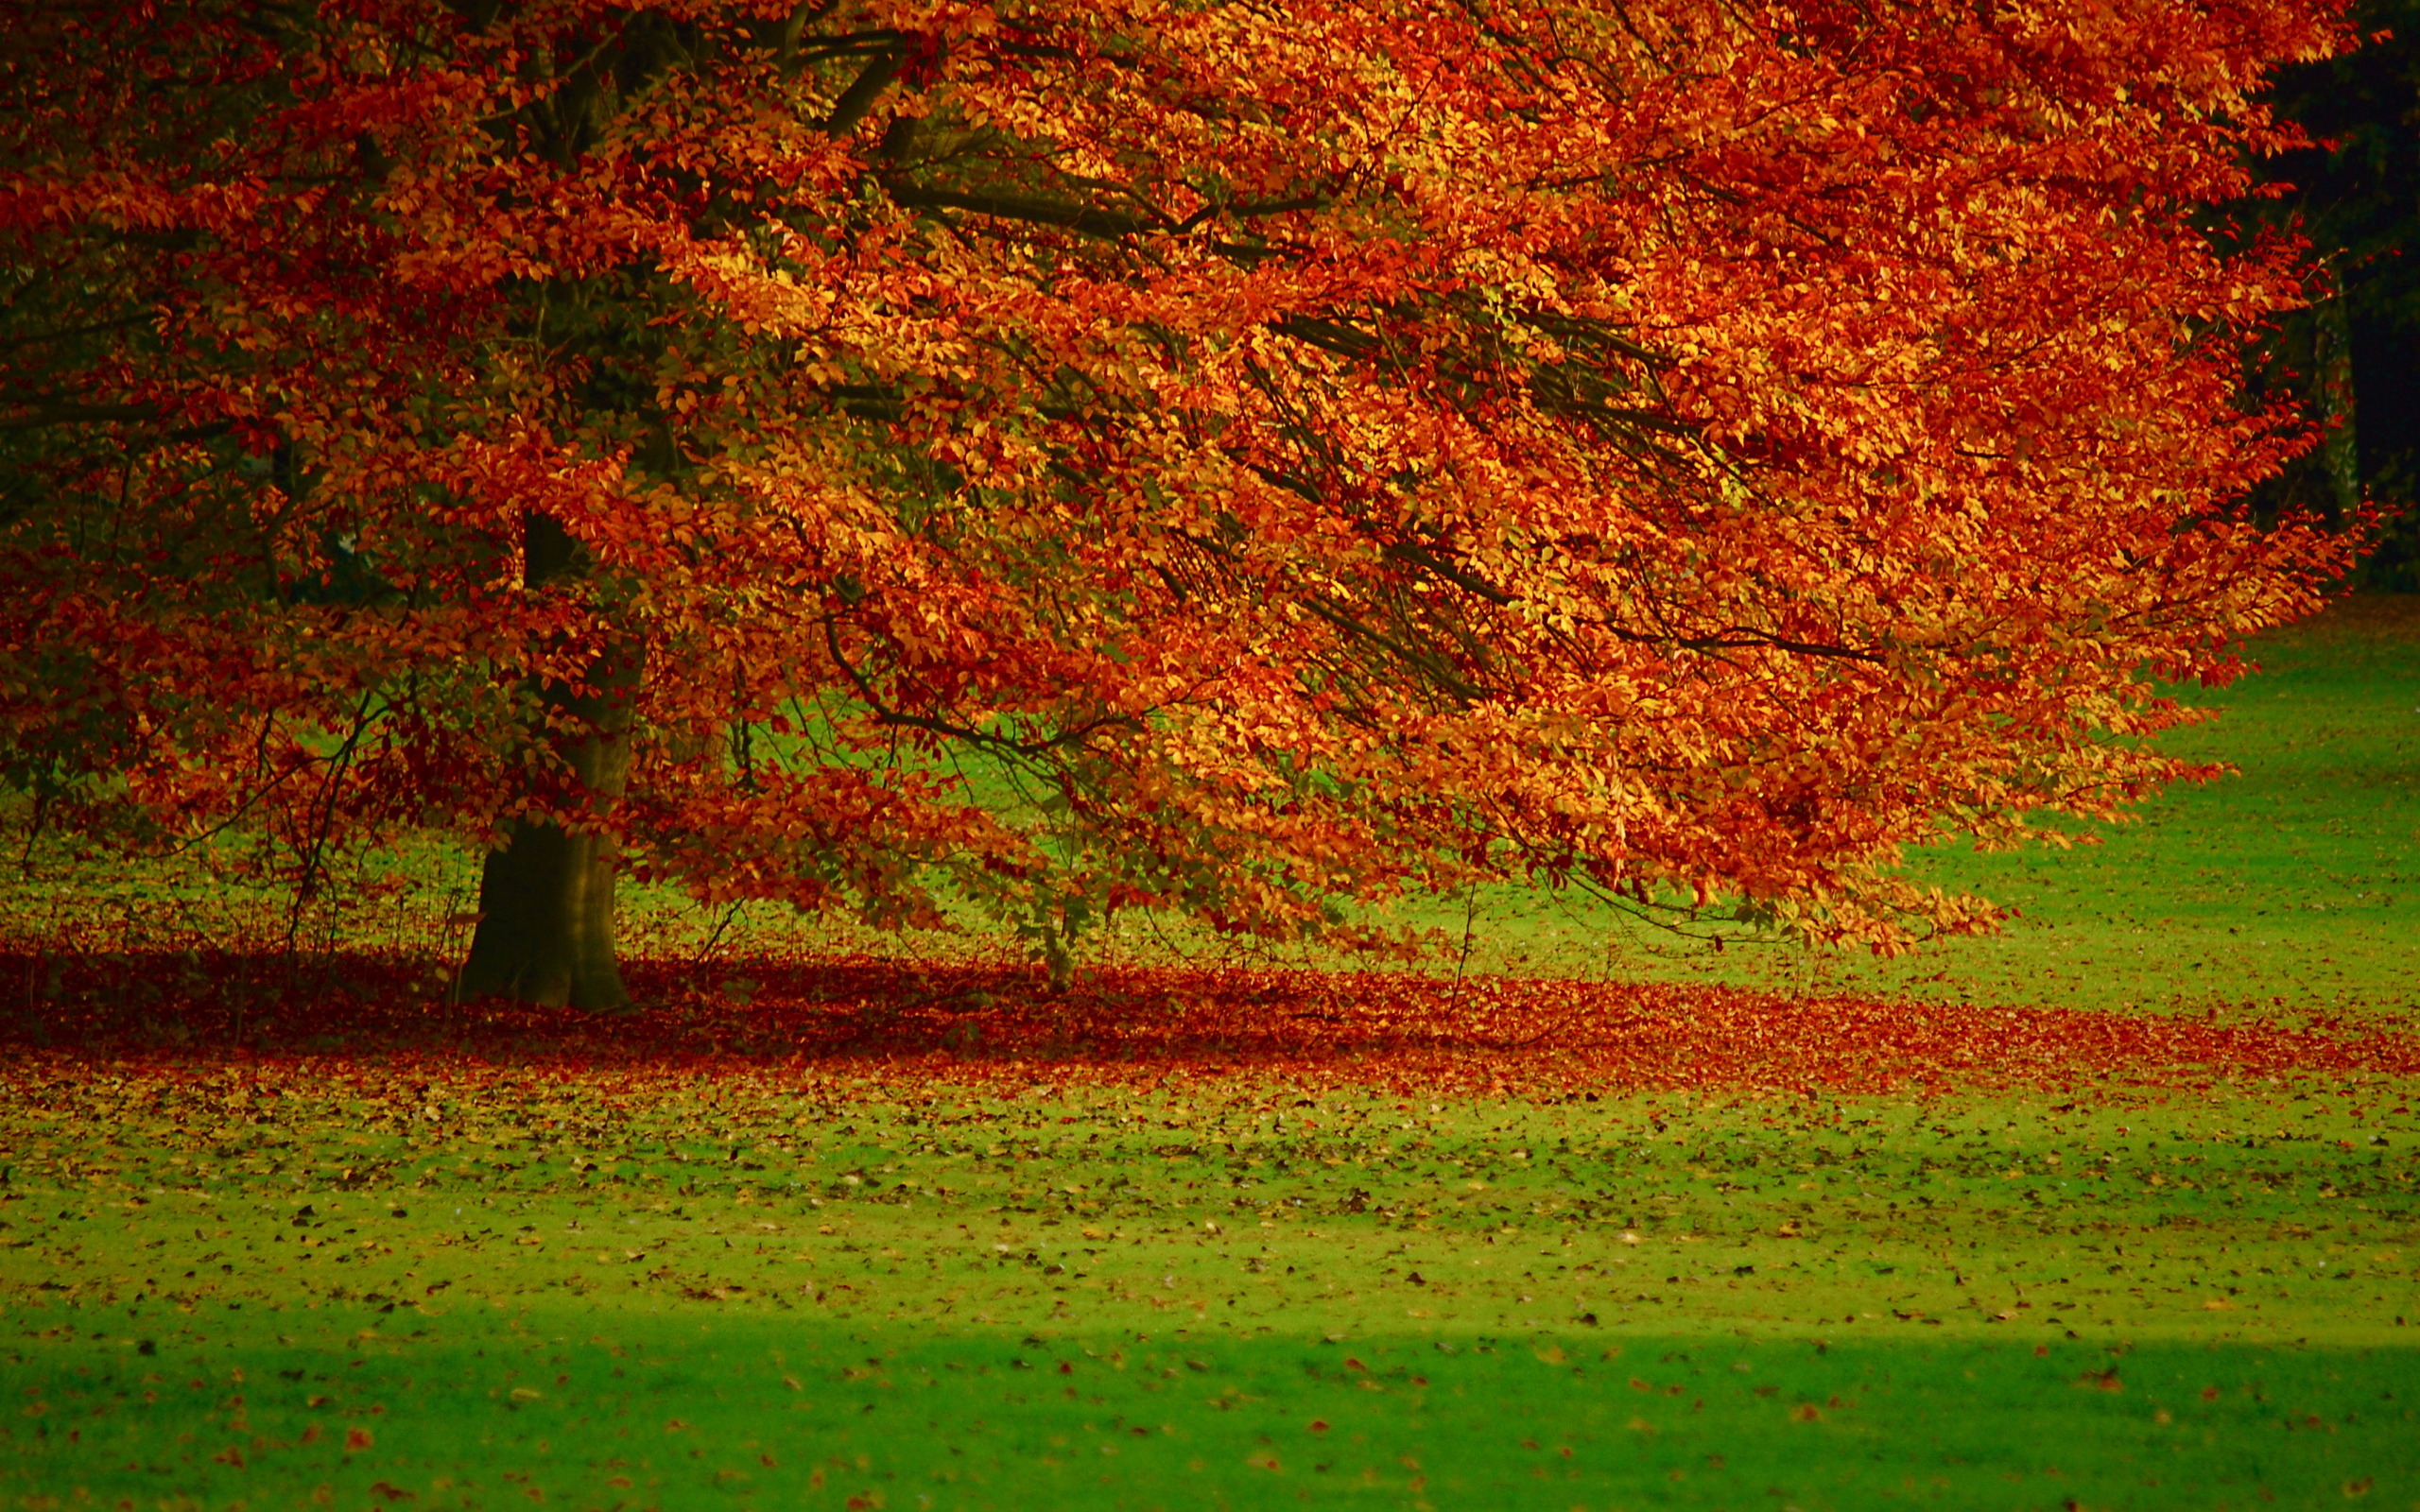 Autumn foliage wallpapers and images   wallpapers